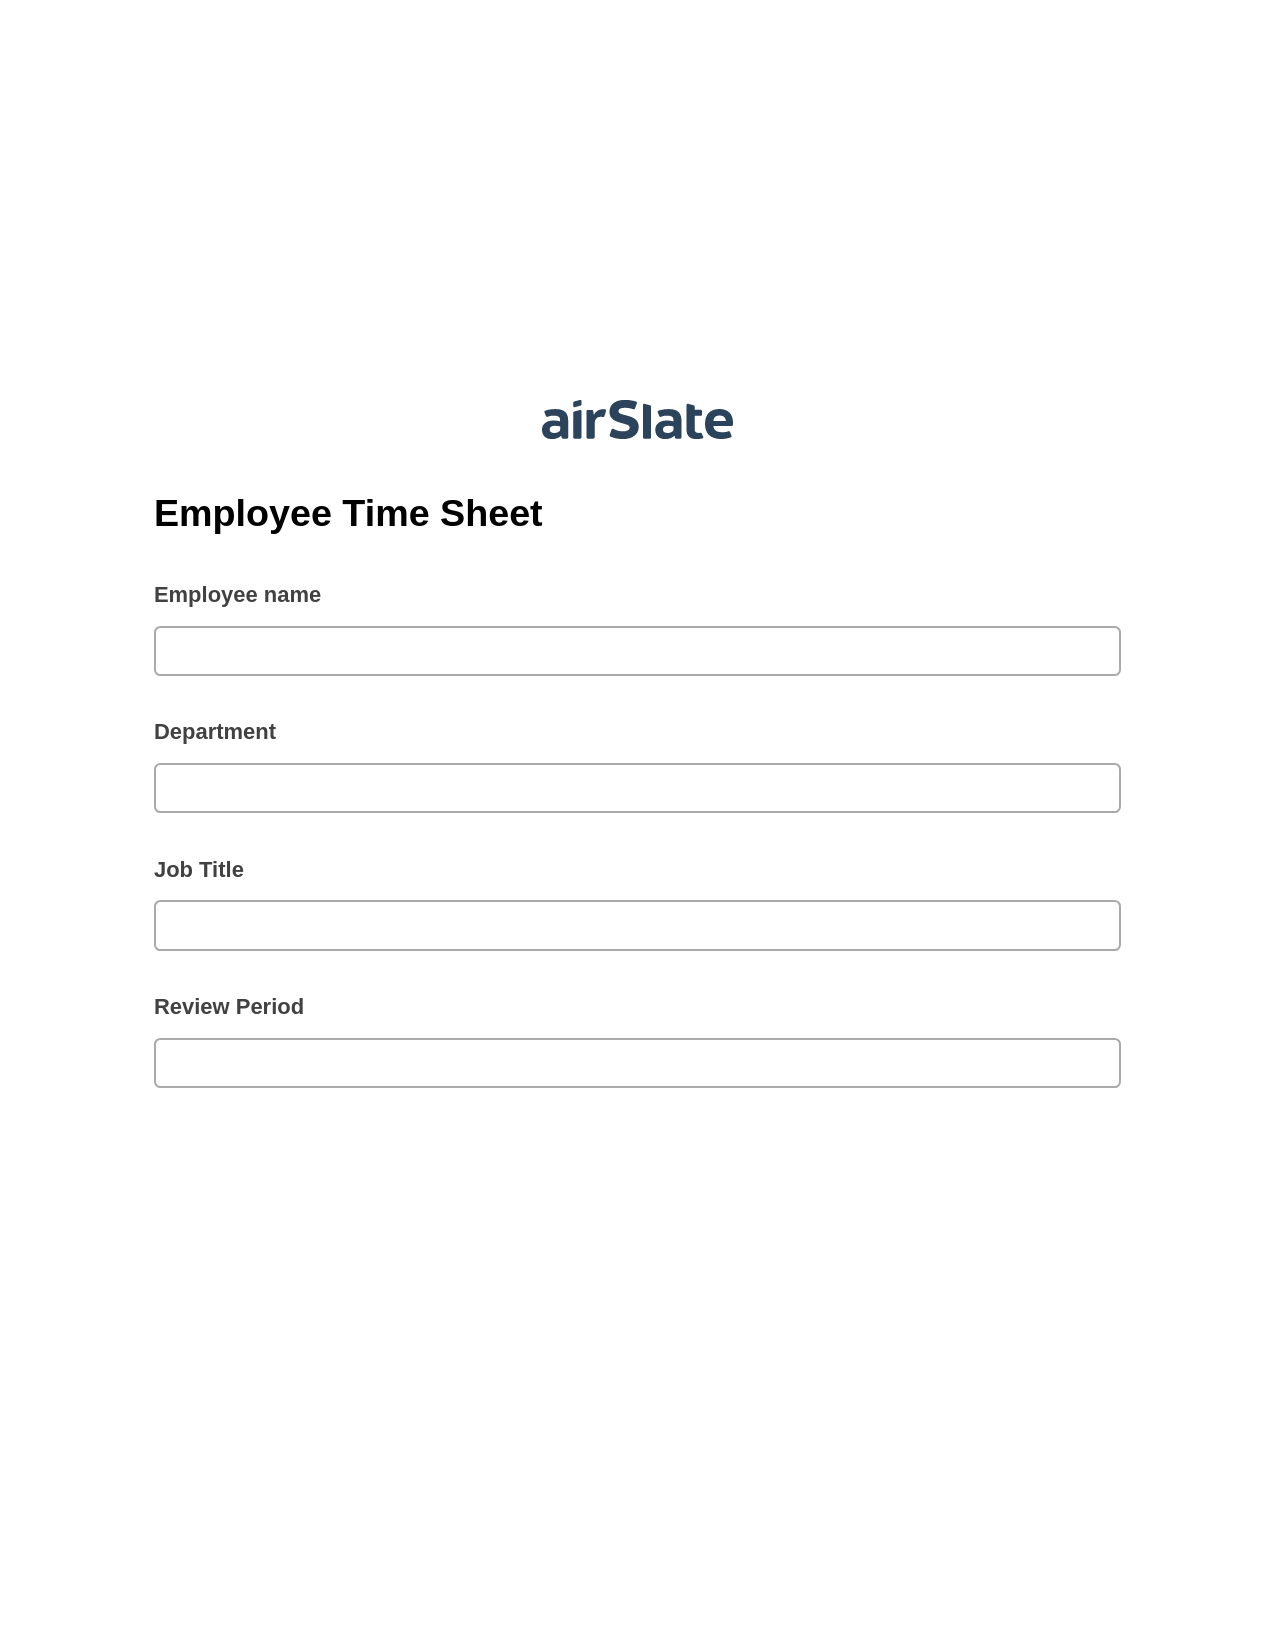 Employee Time Sheet Pre-fill from Excel Spreadsheet Bot, Create slate addon, Export to Excel 365 Bot